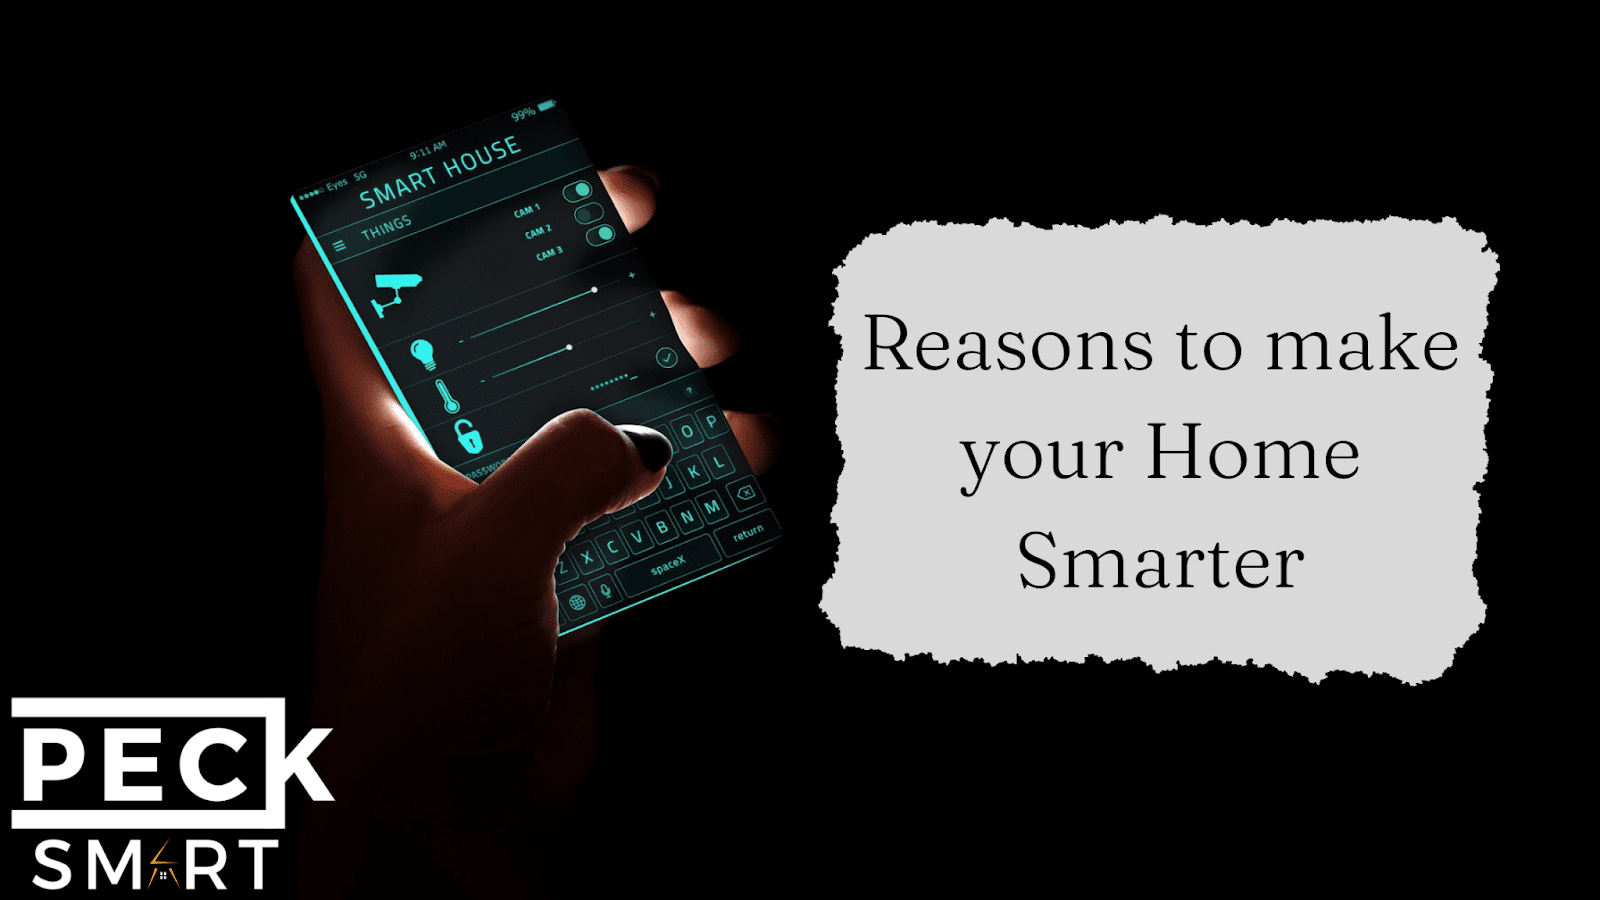 Reasons your home should be smarter.